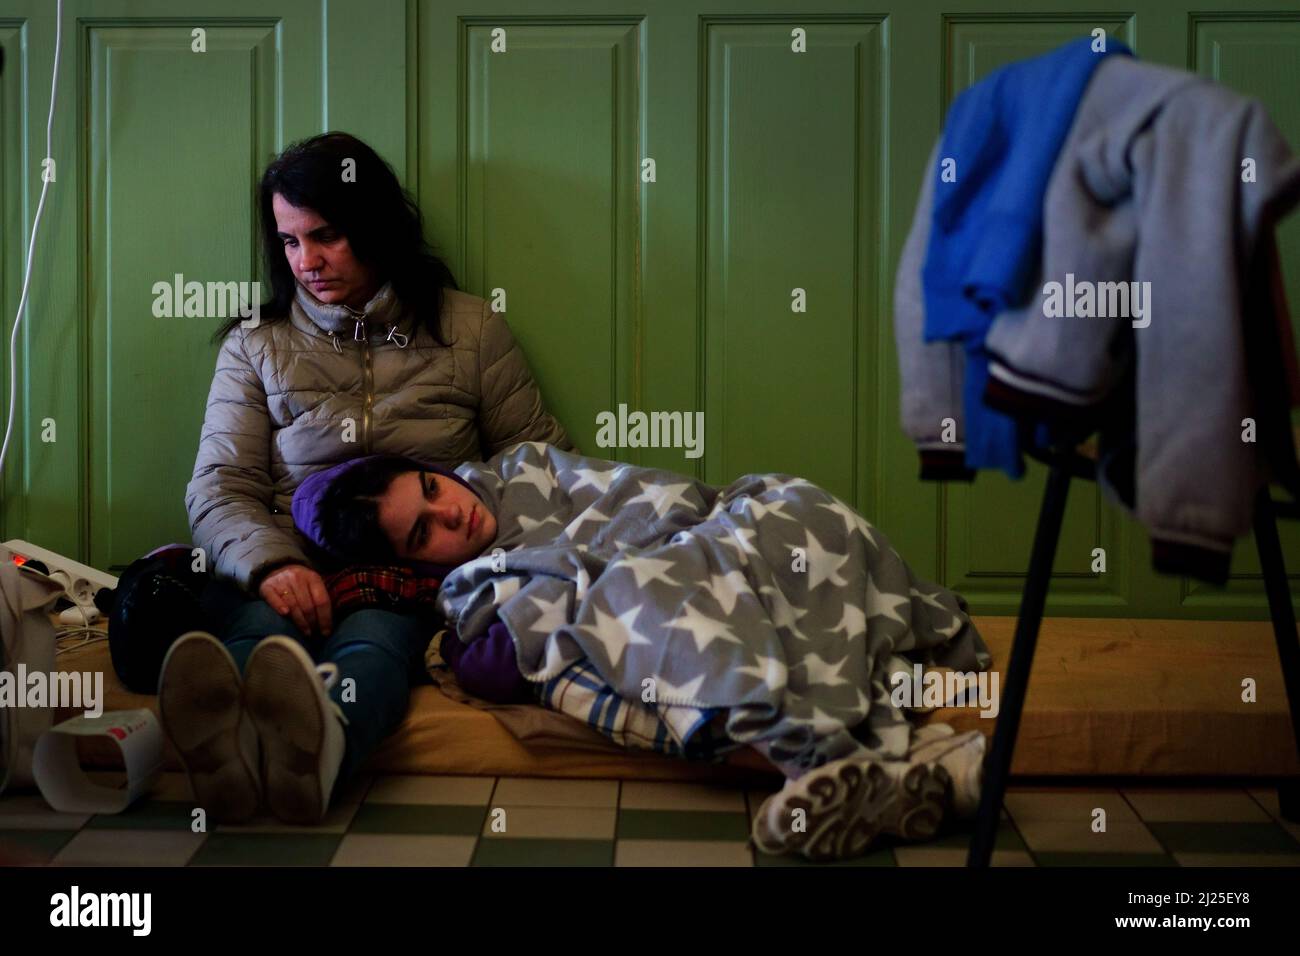 a-ukrainian-woman-and-her-child-rest-in-a-refuge-room-at-przemysl